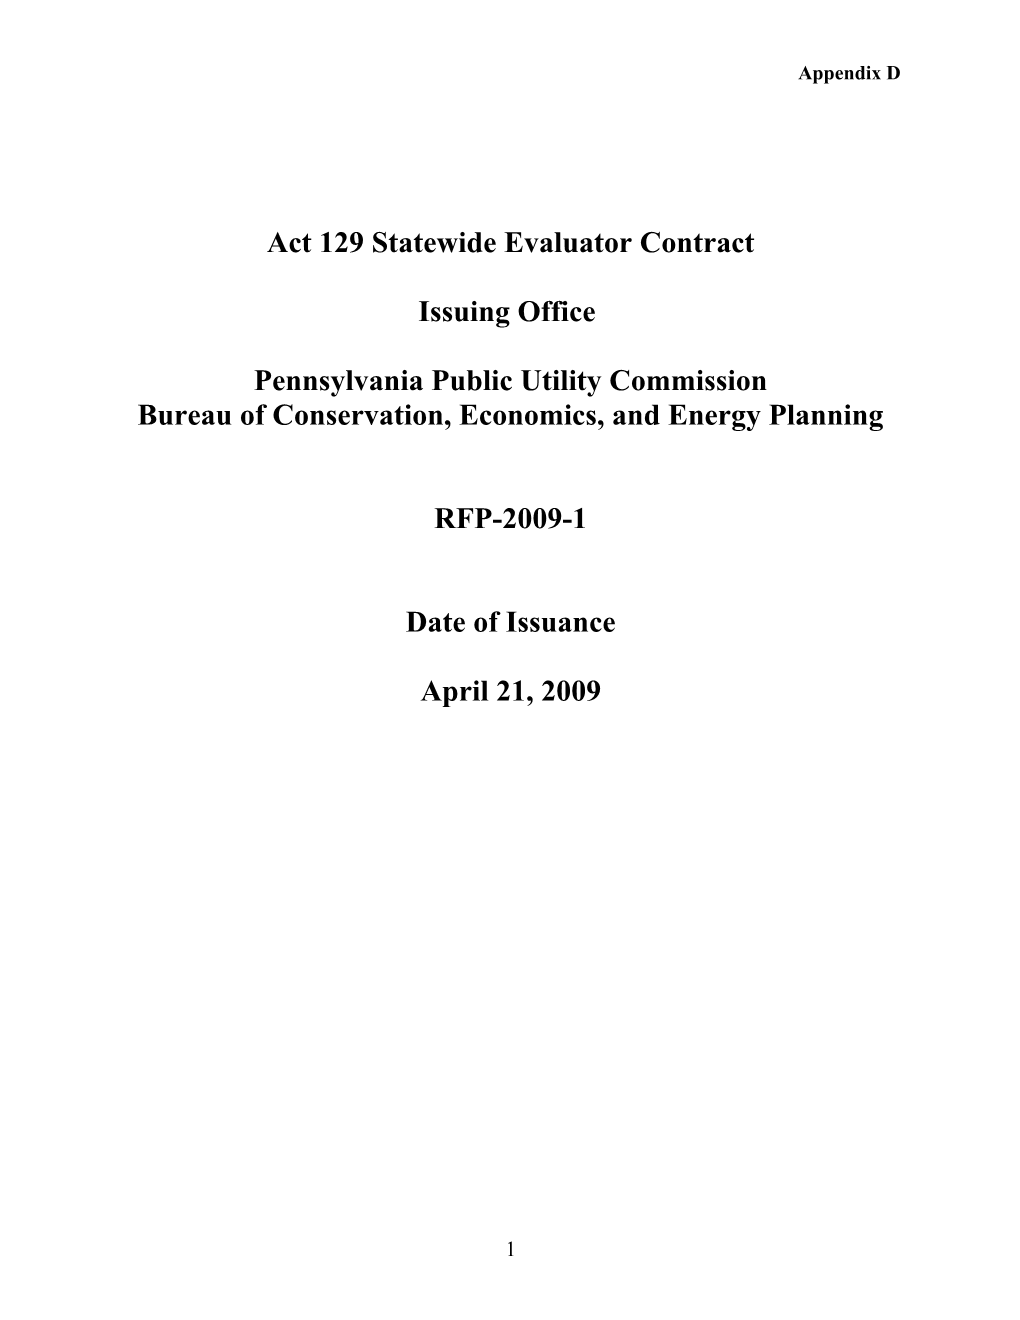 Act 129 Statewide Evaluator Contract